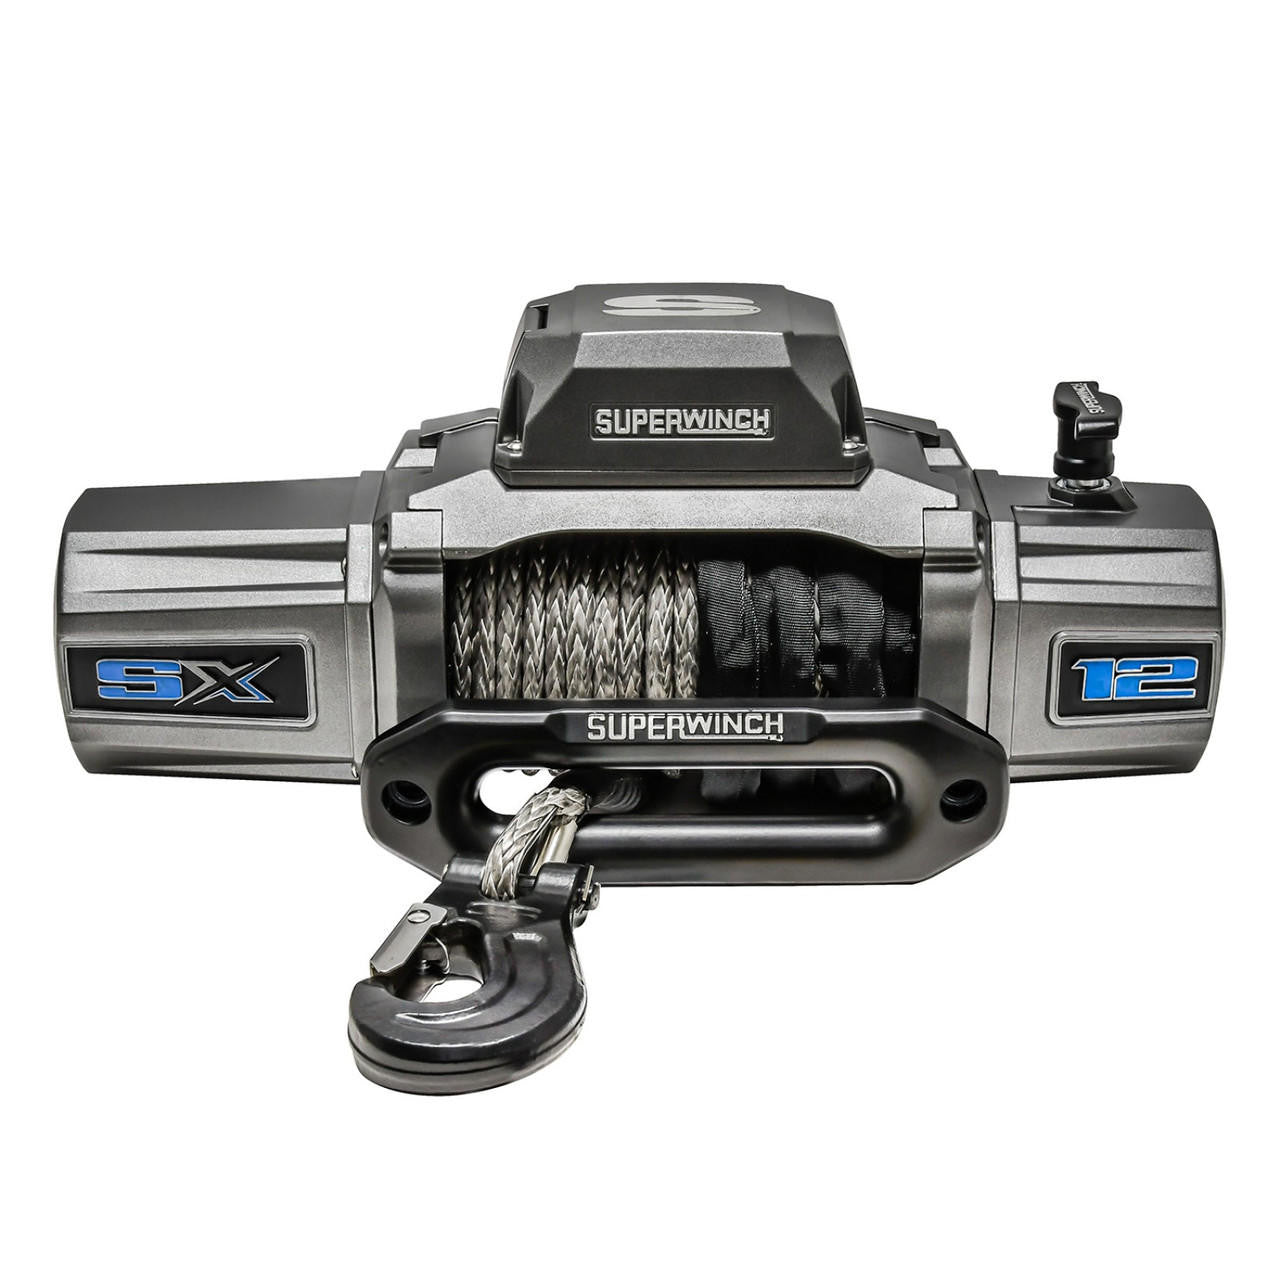  Superwinch SX12SR Winch, 12,000lb Synthetic Rope Winch 1712201 